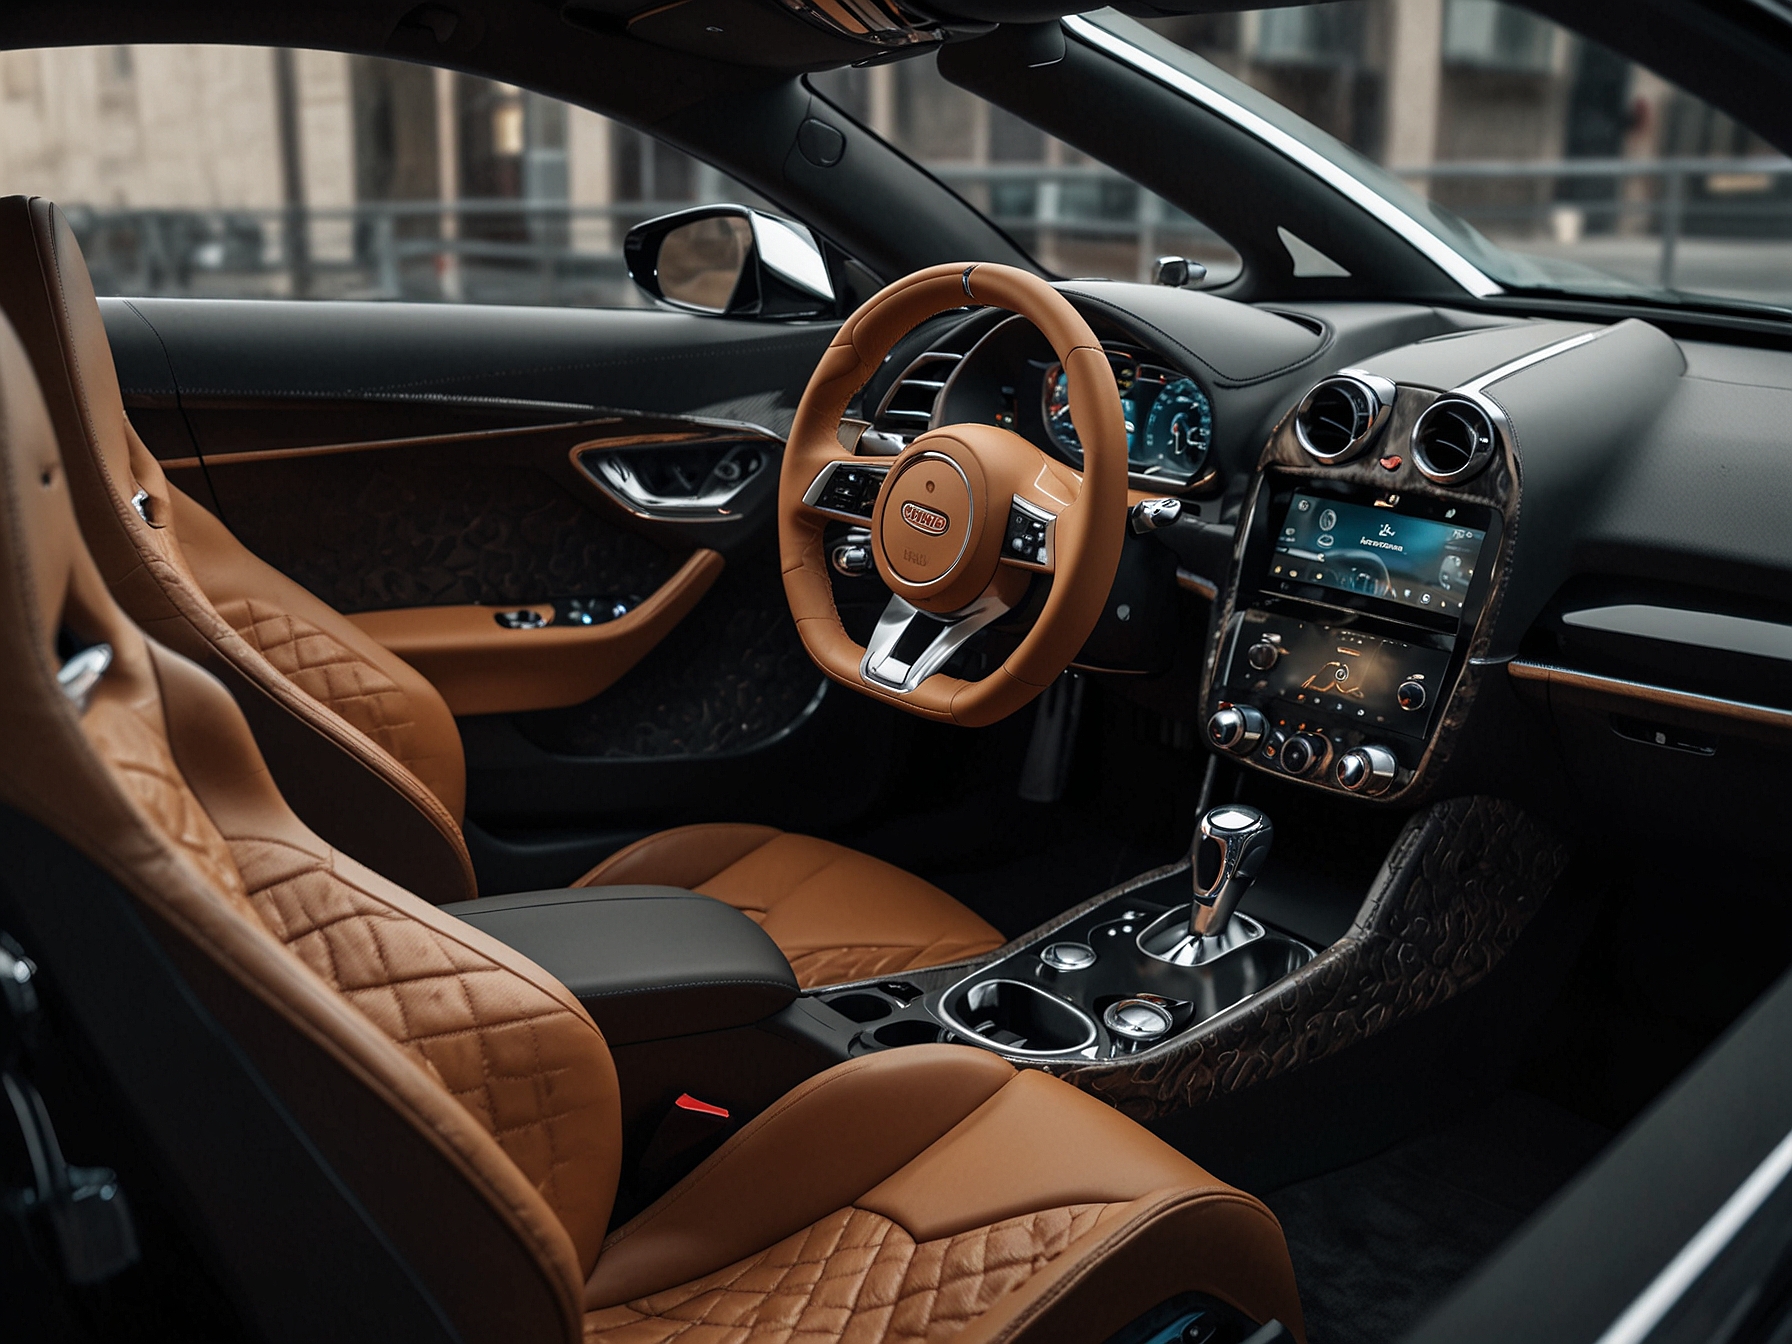 Inside the Bugatti hypercar, the luxurious cabin features premium materials such as leather, carbon fiber, and metal accents. High-tech infotainment and driver aids further enhance the driving experience.